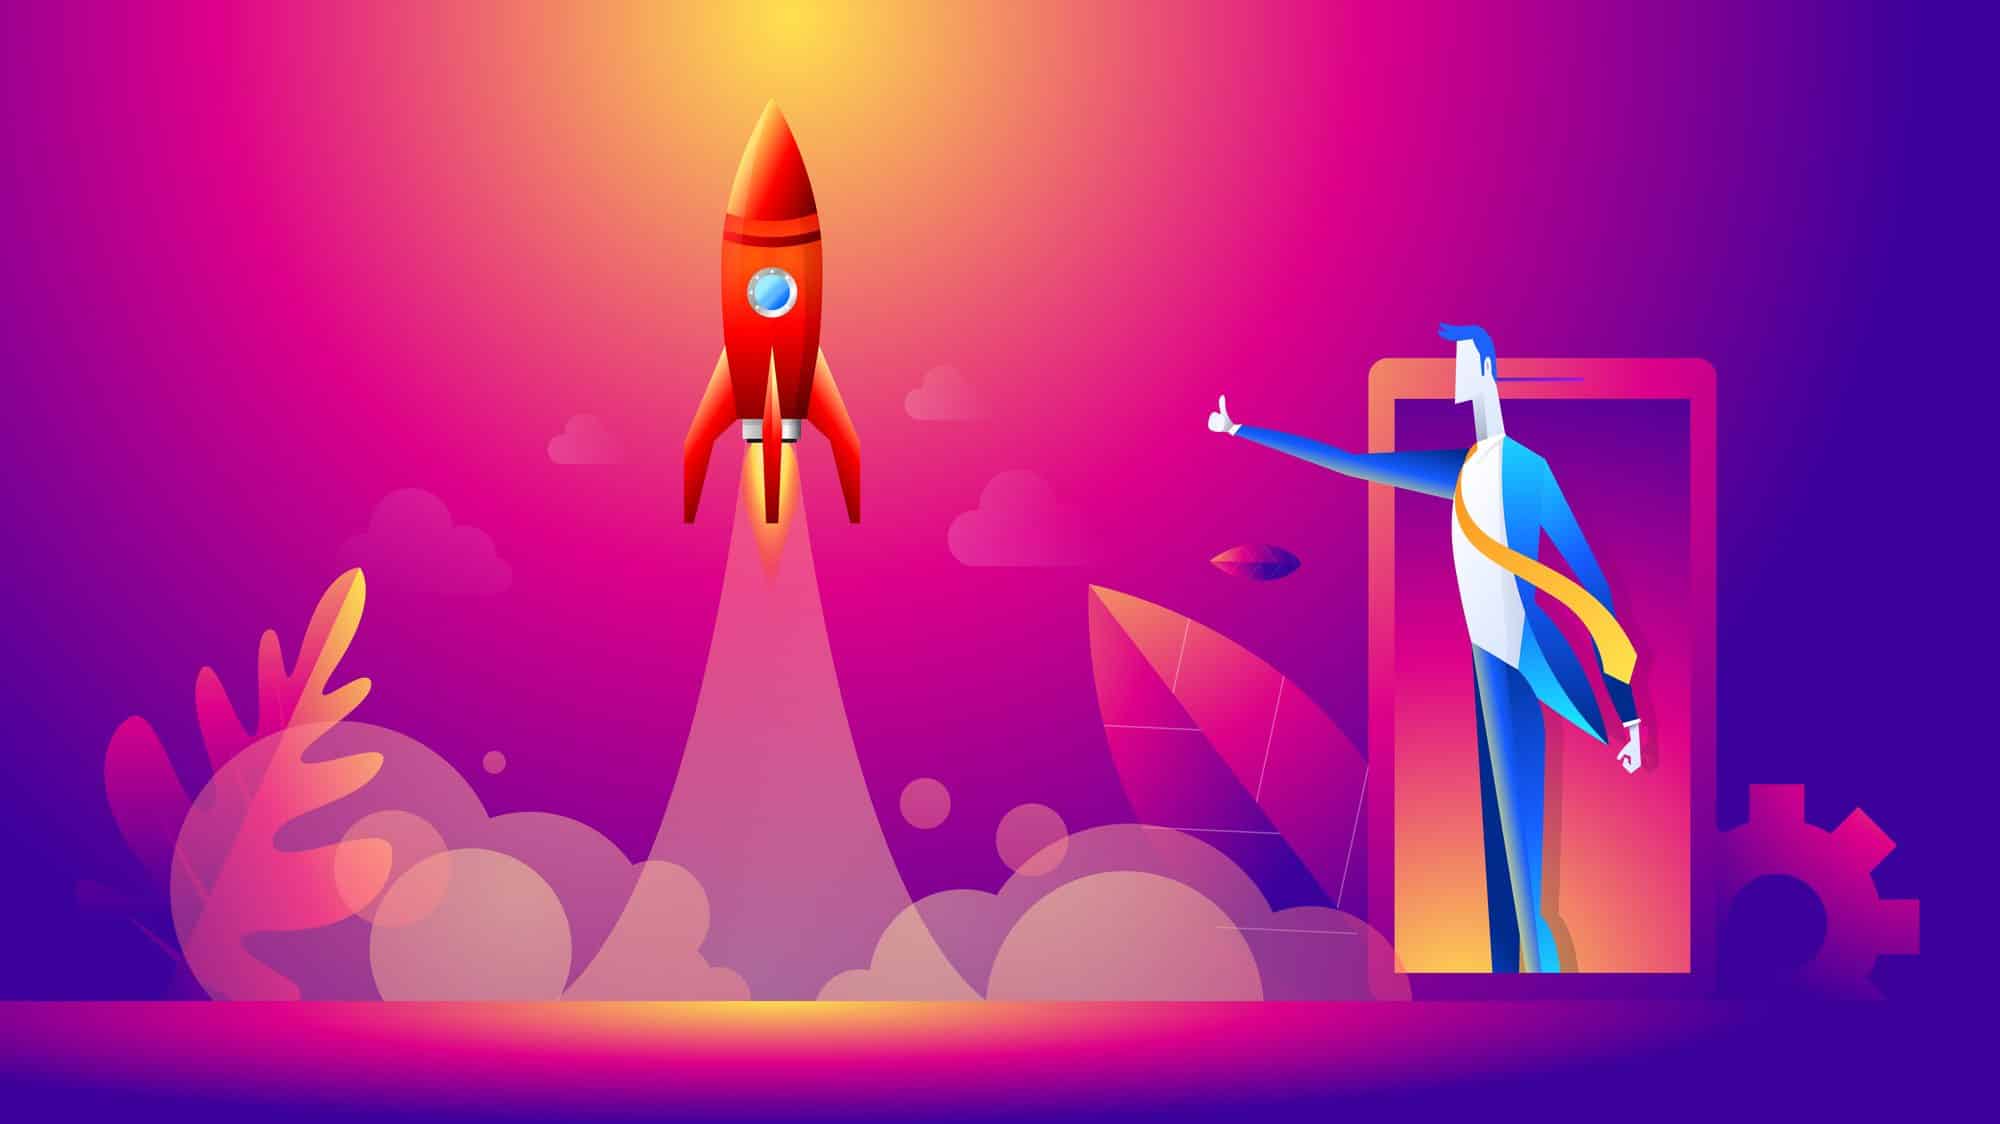 Concept of startup. Cartoon happy business people thumb up for rocket launch. Flat design, vector illustration.